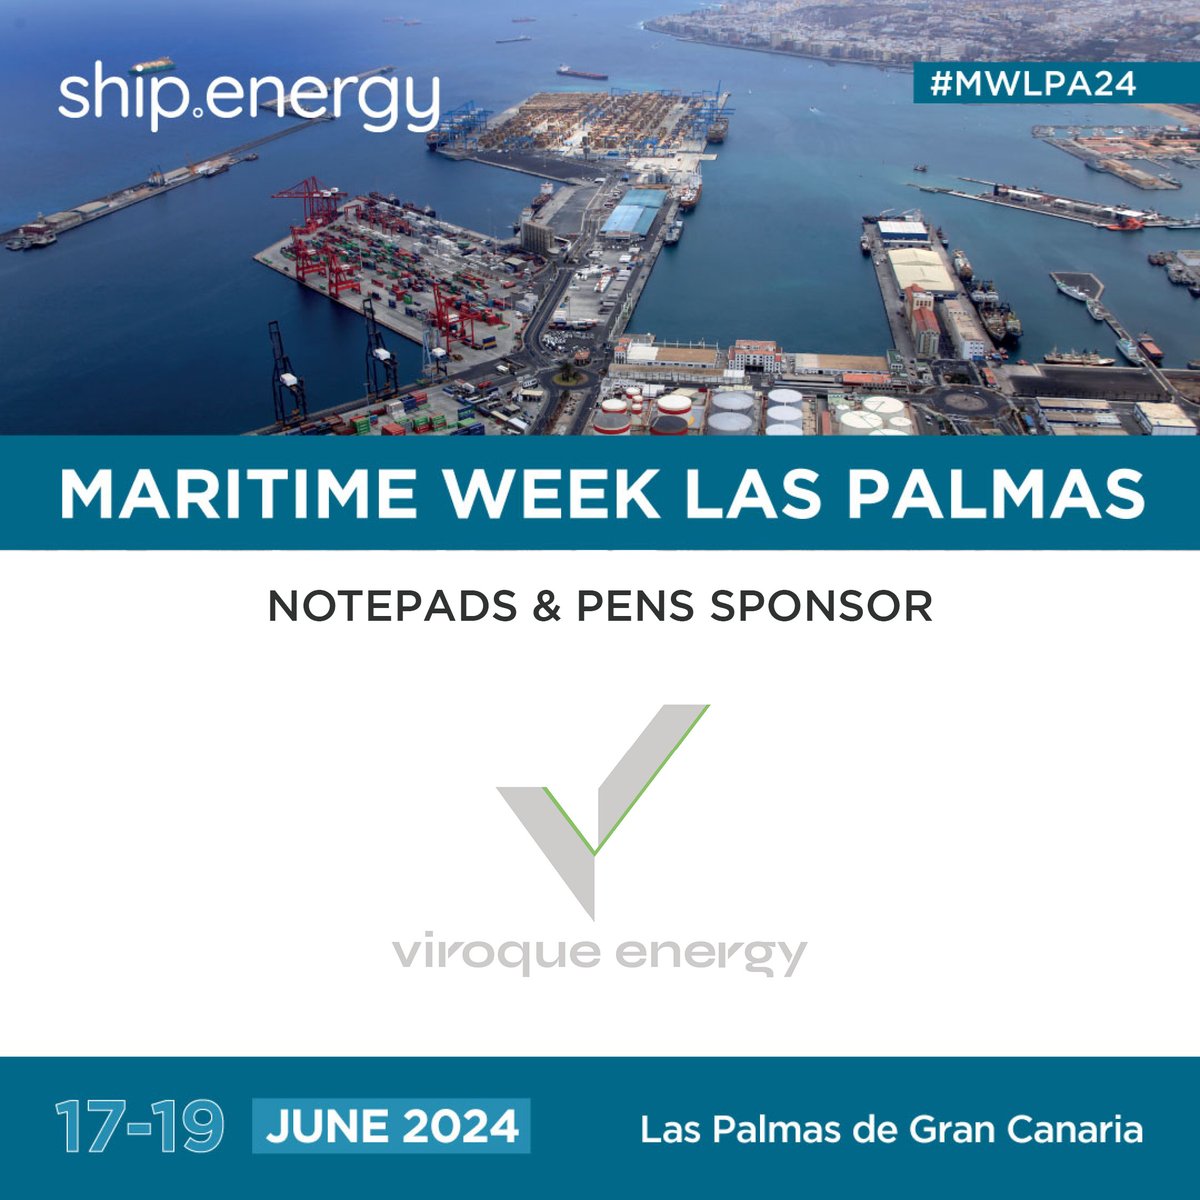 We are delighted to announce Viroque Energy Portugal as Notepads and Pens Sponsors for Maritime Week Las Palmas taking place in Gran Canaria 17-19 June 2024. Programme ➔ lnkd.in/eNdsq85U Register ➔ lnkd.in/e37BnMSb #MWLPA24 #LasPalmas #GranCanaria #Shipping